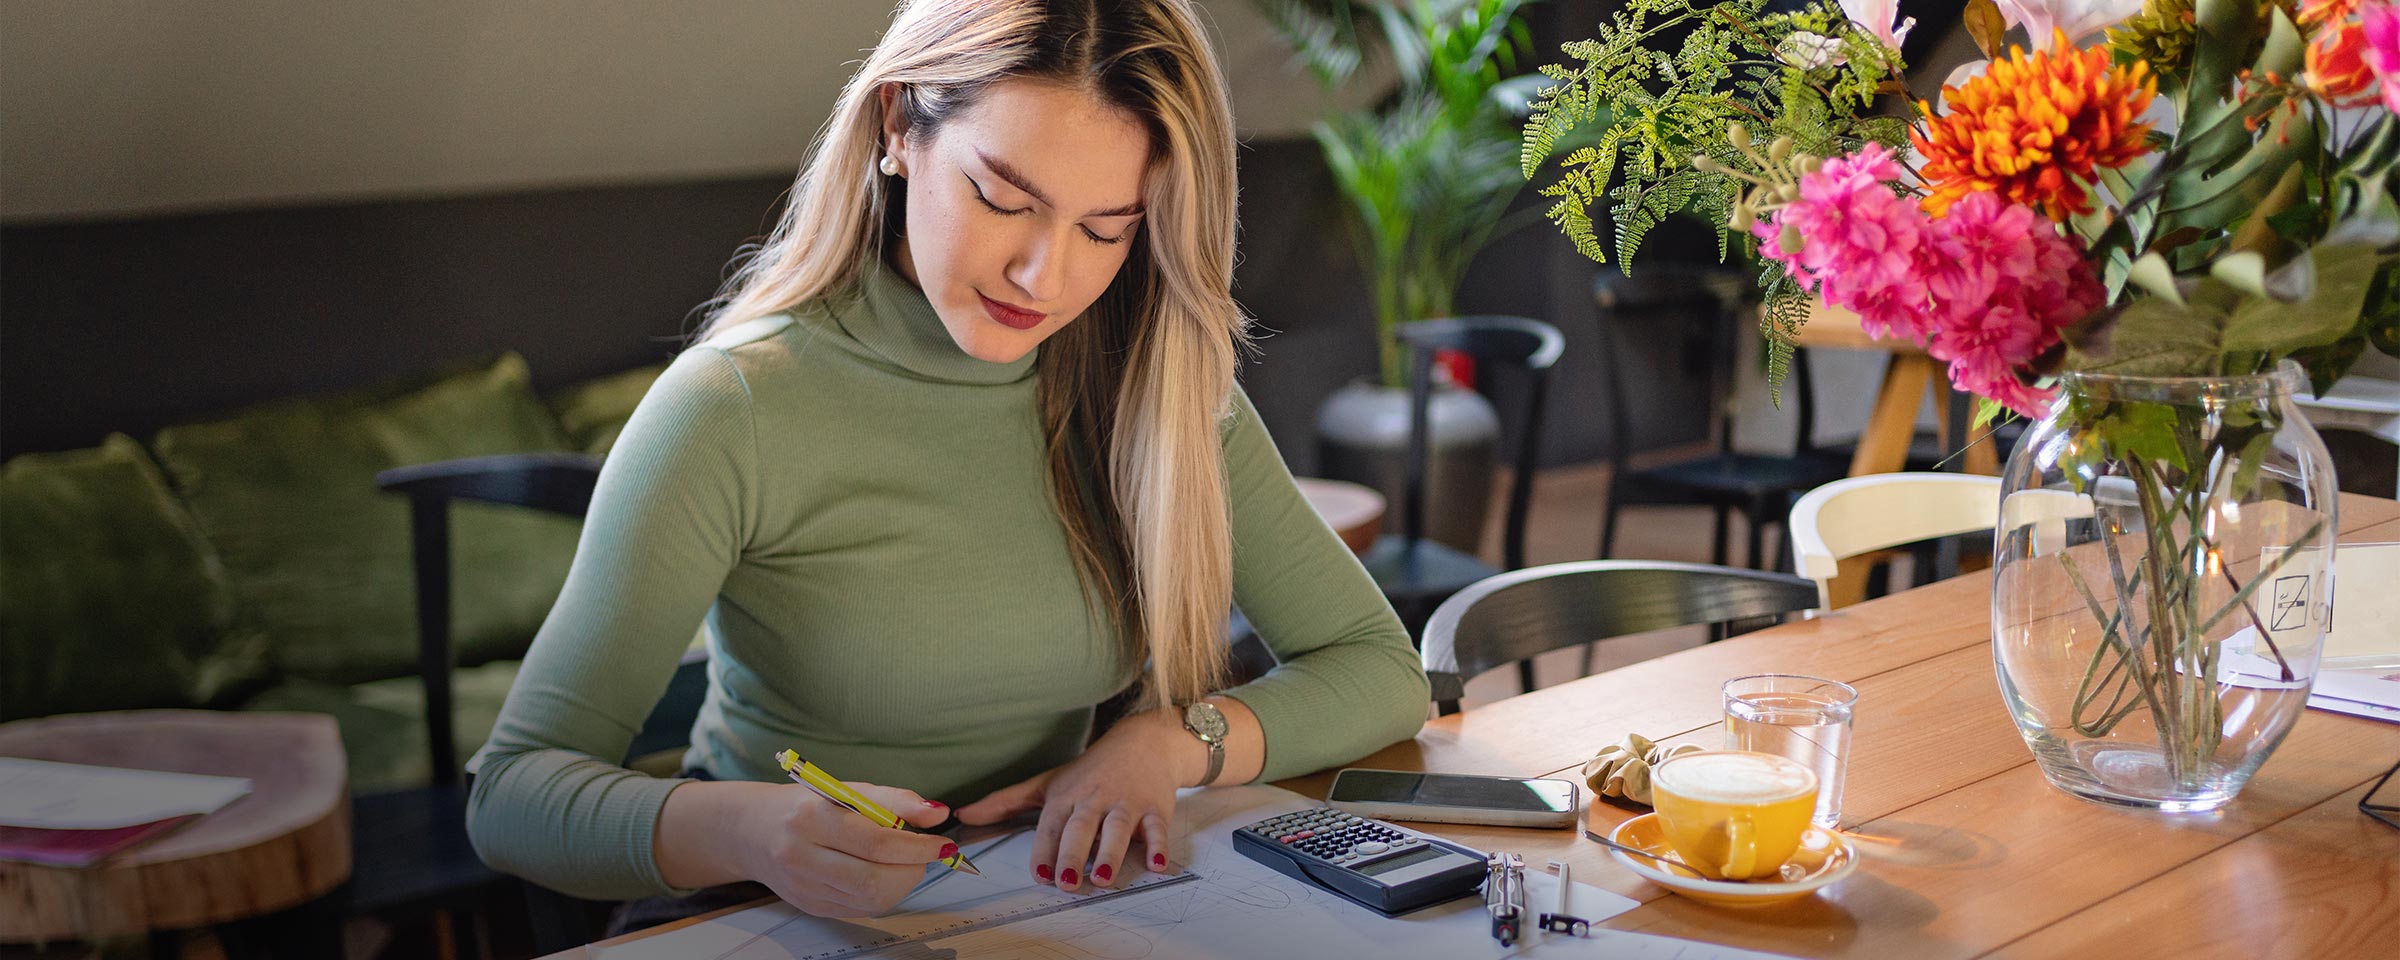 Woman sitting in a restaurant with flowers on the table and is drawing a floor plan